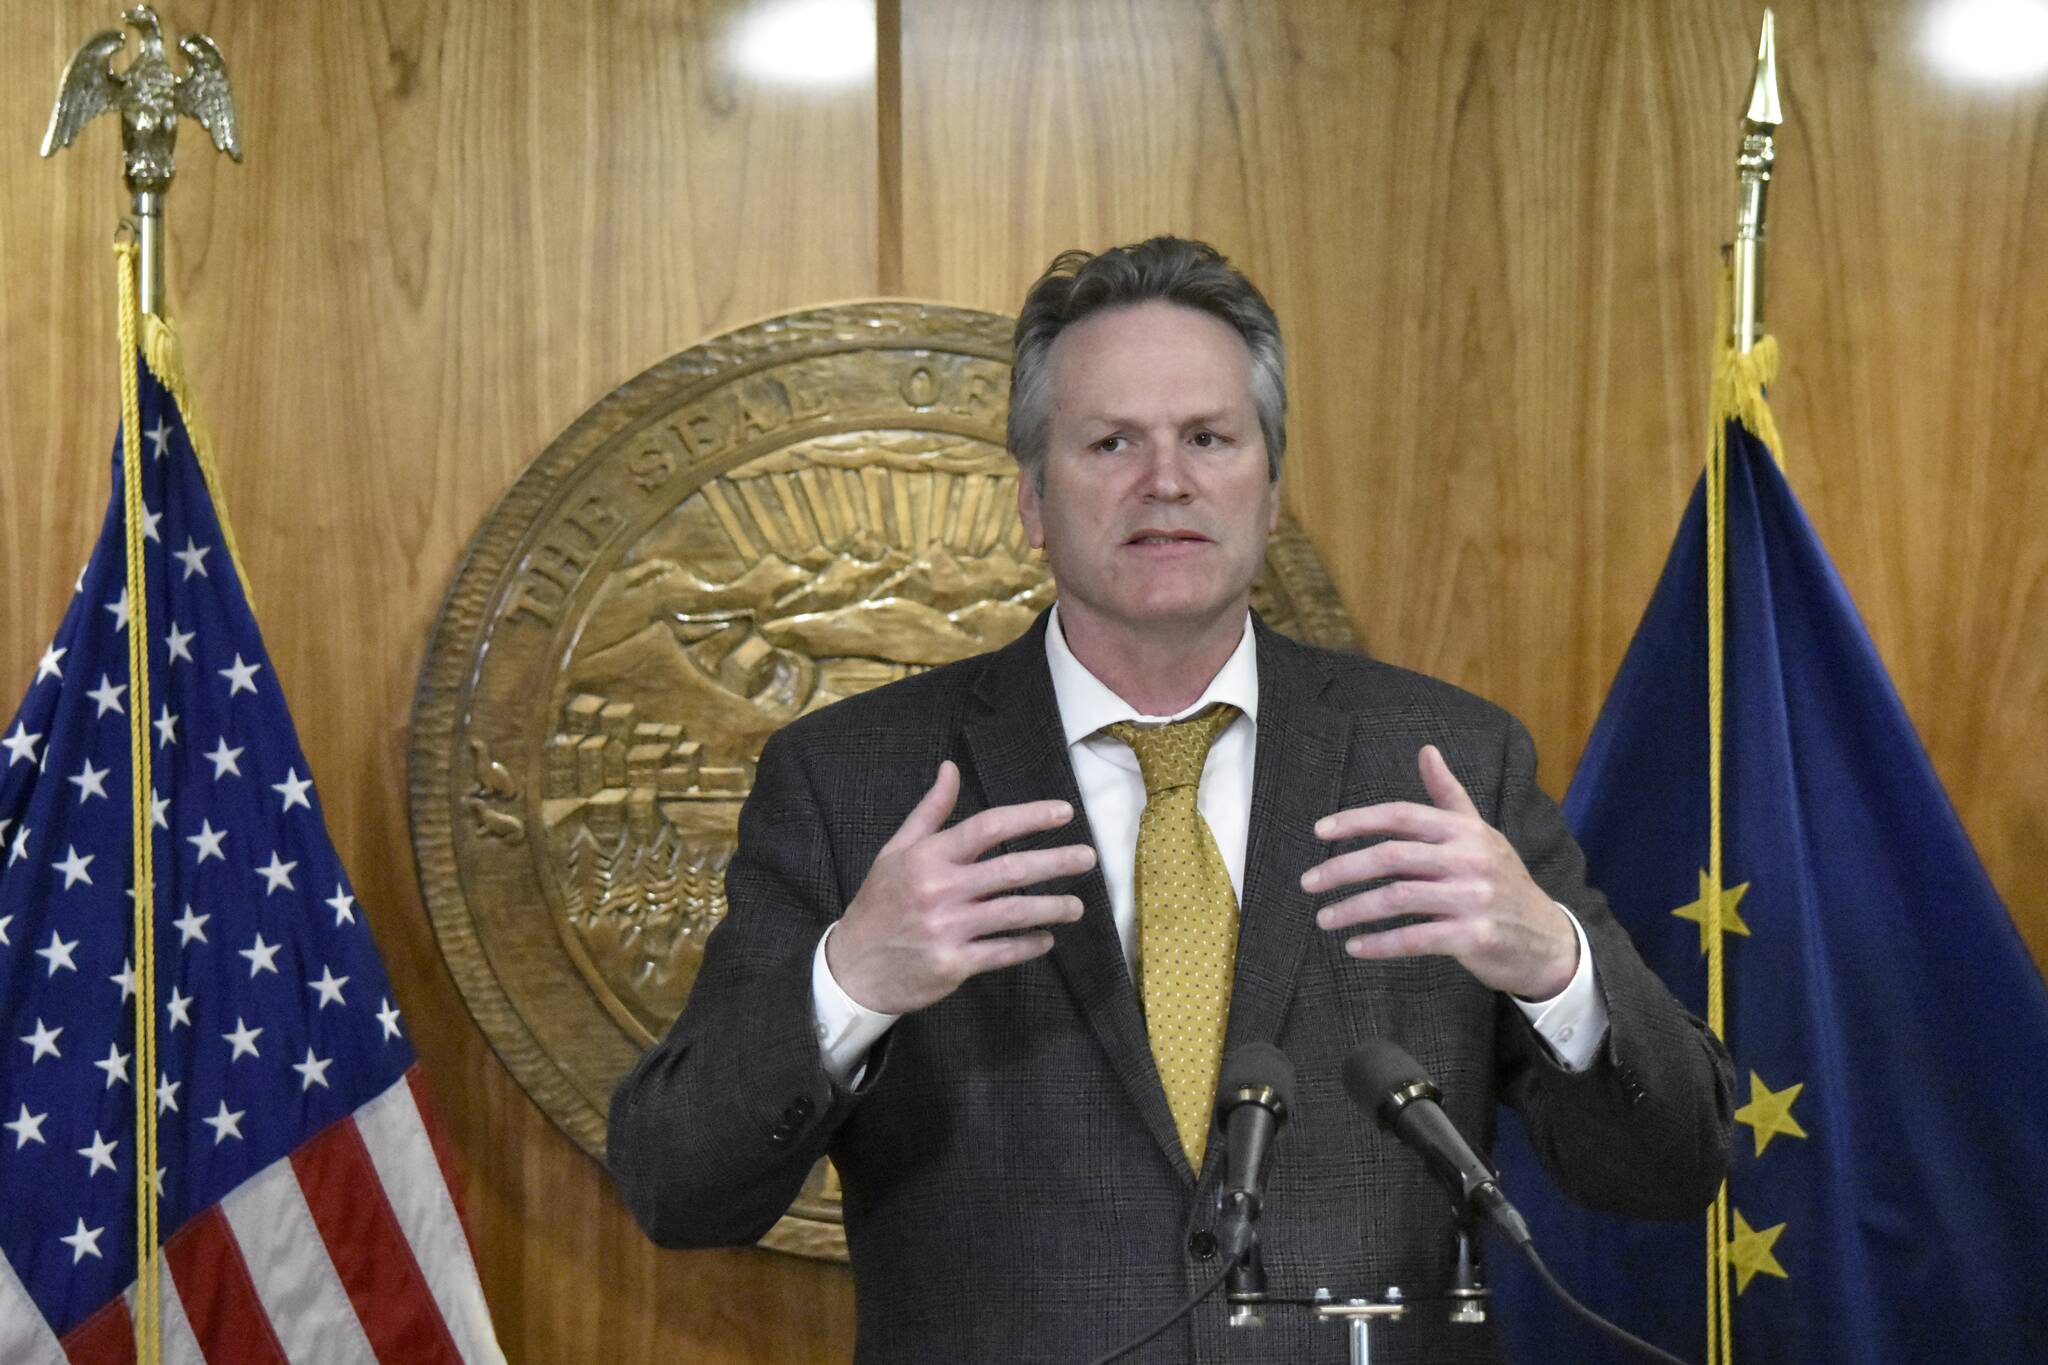 Gov. Mike Dunleavy speaks with reporters about the state’s budget at the Alaska State Capitol on Thursday, May 19, 2022. Dunleavy, who received a conditional endorsement from former President Donald Trump, was among the first prominent Alaska politicians to weigh in on the FBI’s search of Trump’s property. (Peter Segall / Juneau Empire File)